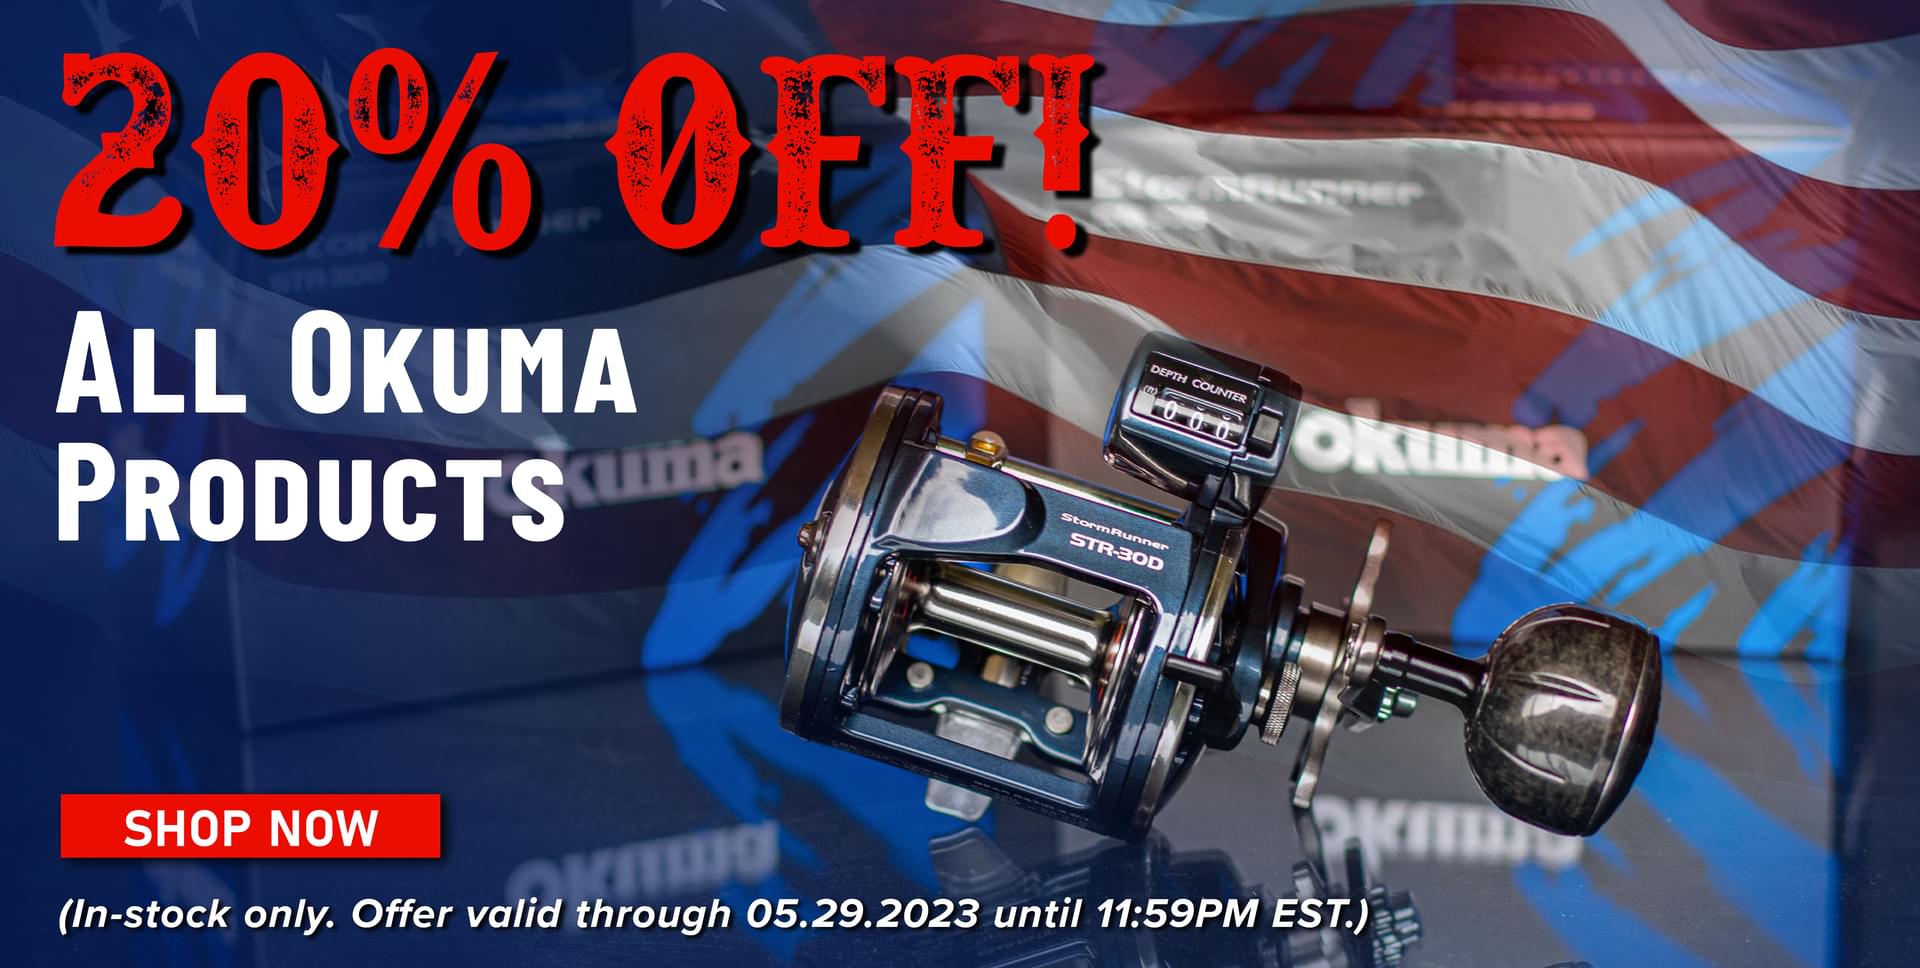 20% Off!  All Okuma Products Shop Now (In-stock only. Offer valid through 05.29.2023 until 11:59PM EST.)